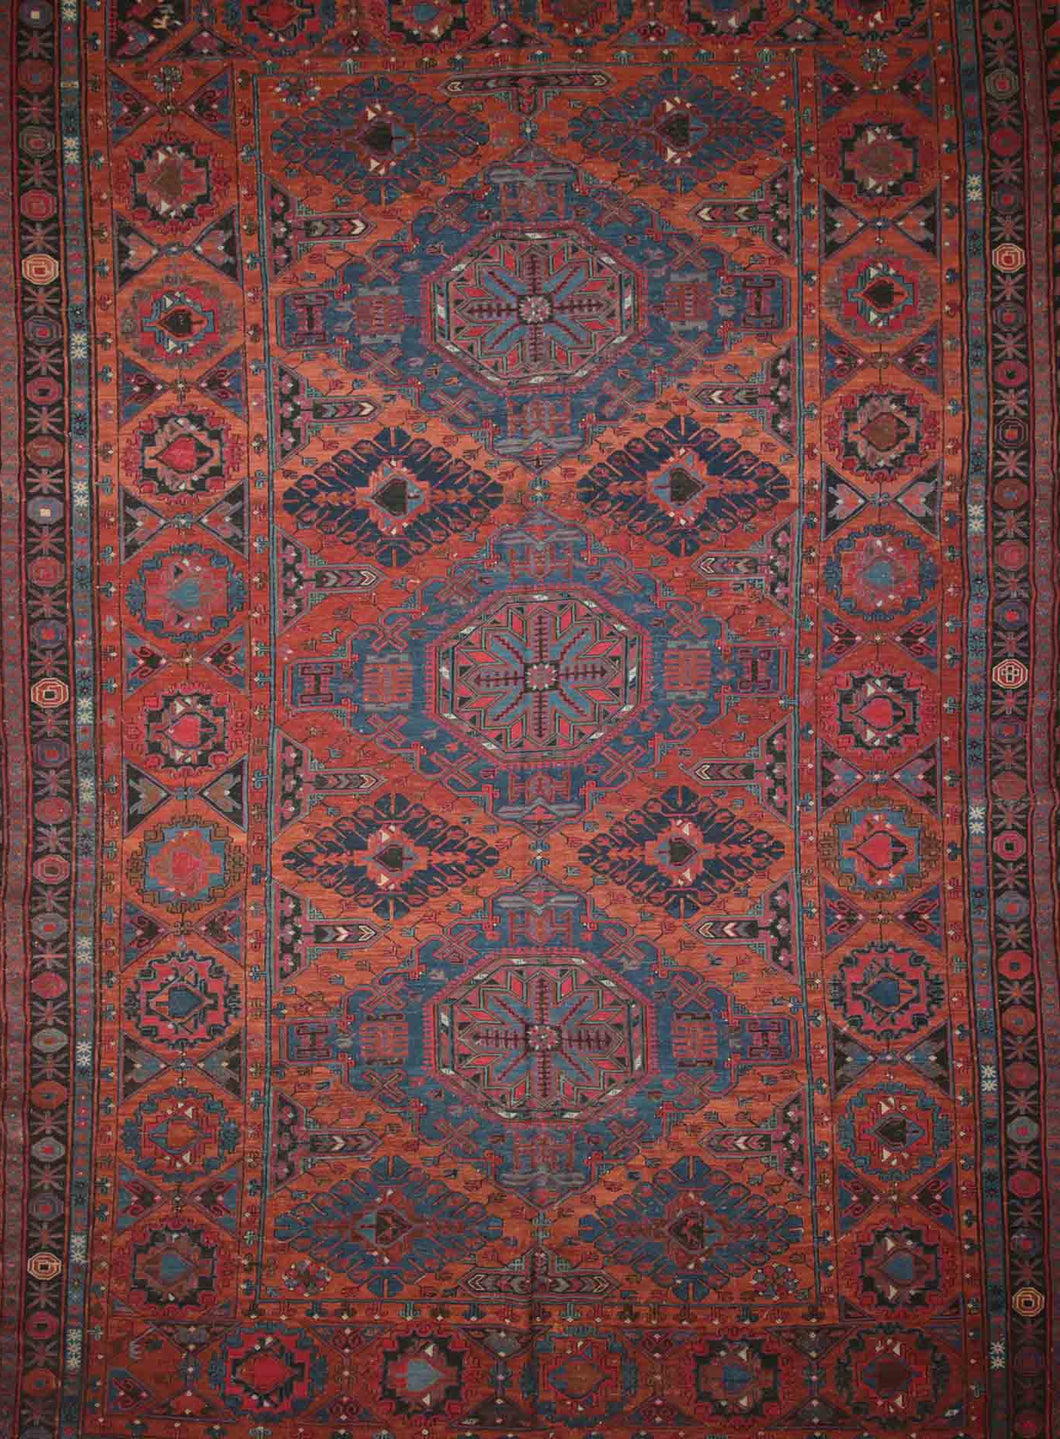 Pre-1900 Vegetable Dye Antique Sumak Persian Rug 9x12 One of a Kind